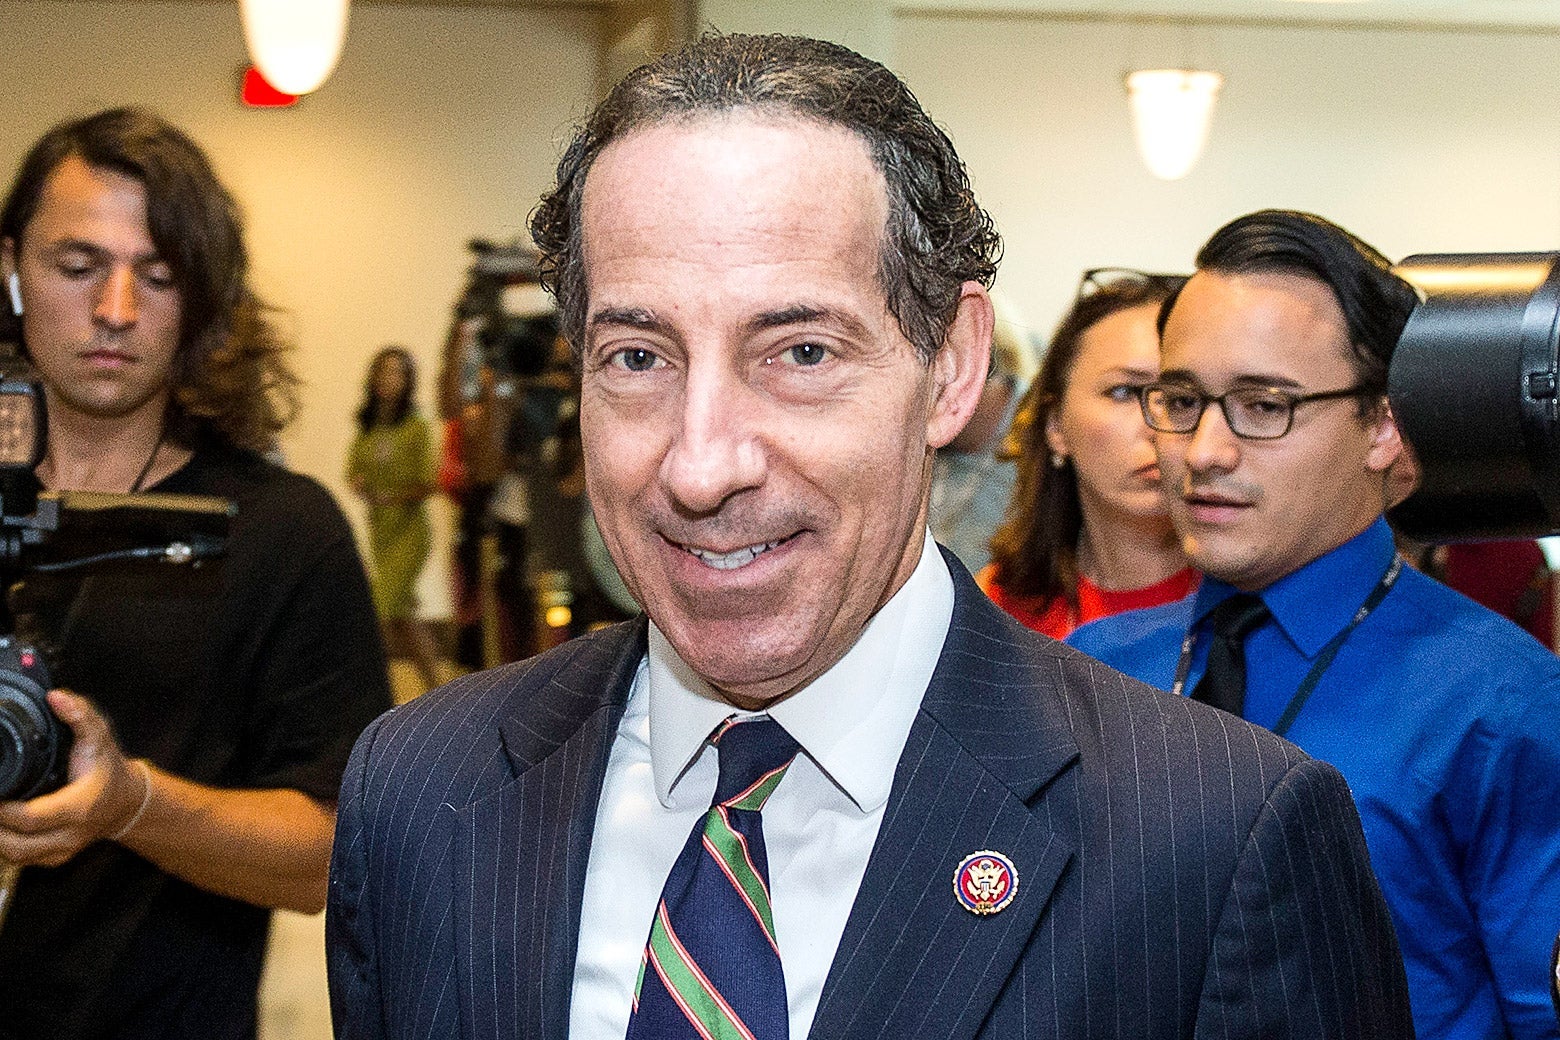 Rep. Jamie Raskin smiles while leaving Capitol Hill on Oct. 3 in Washington.